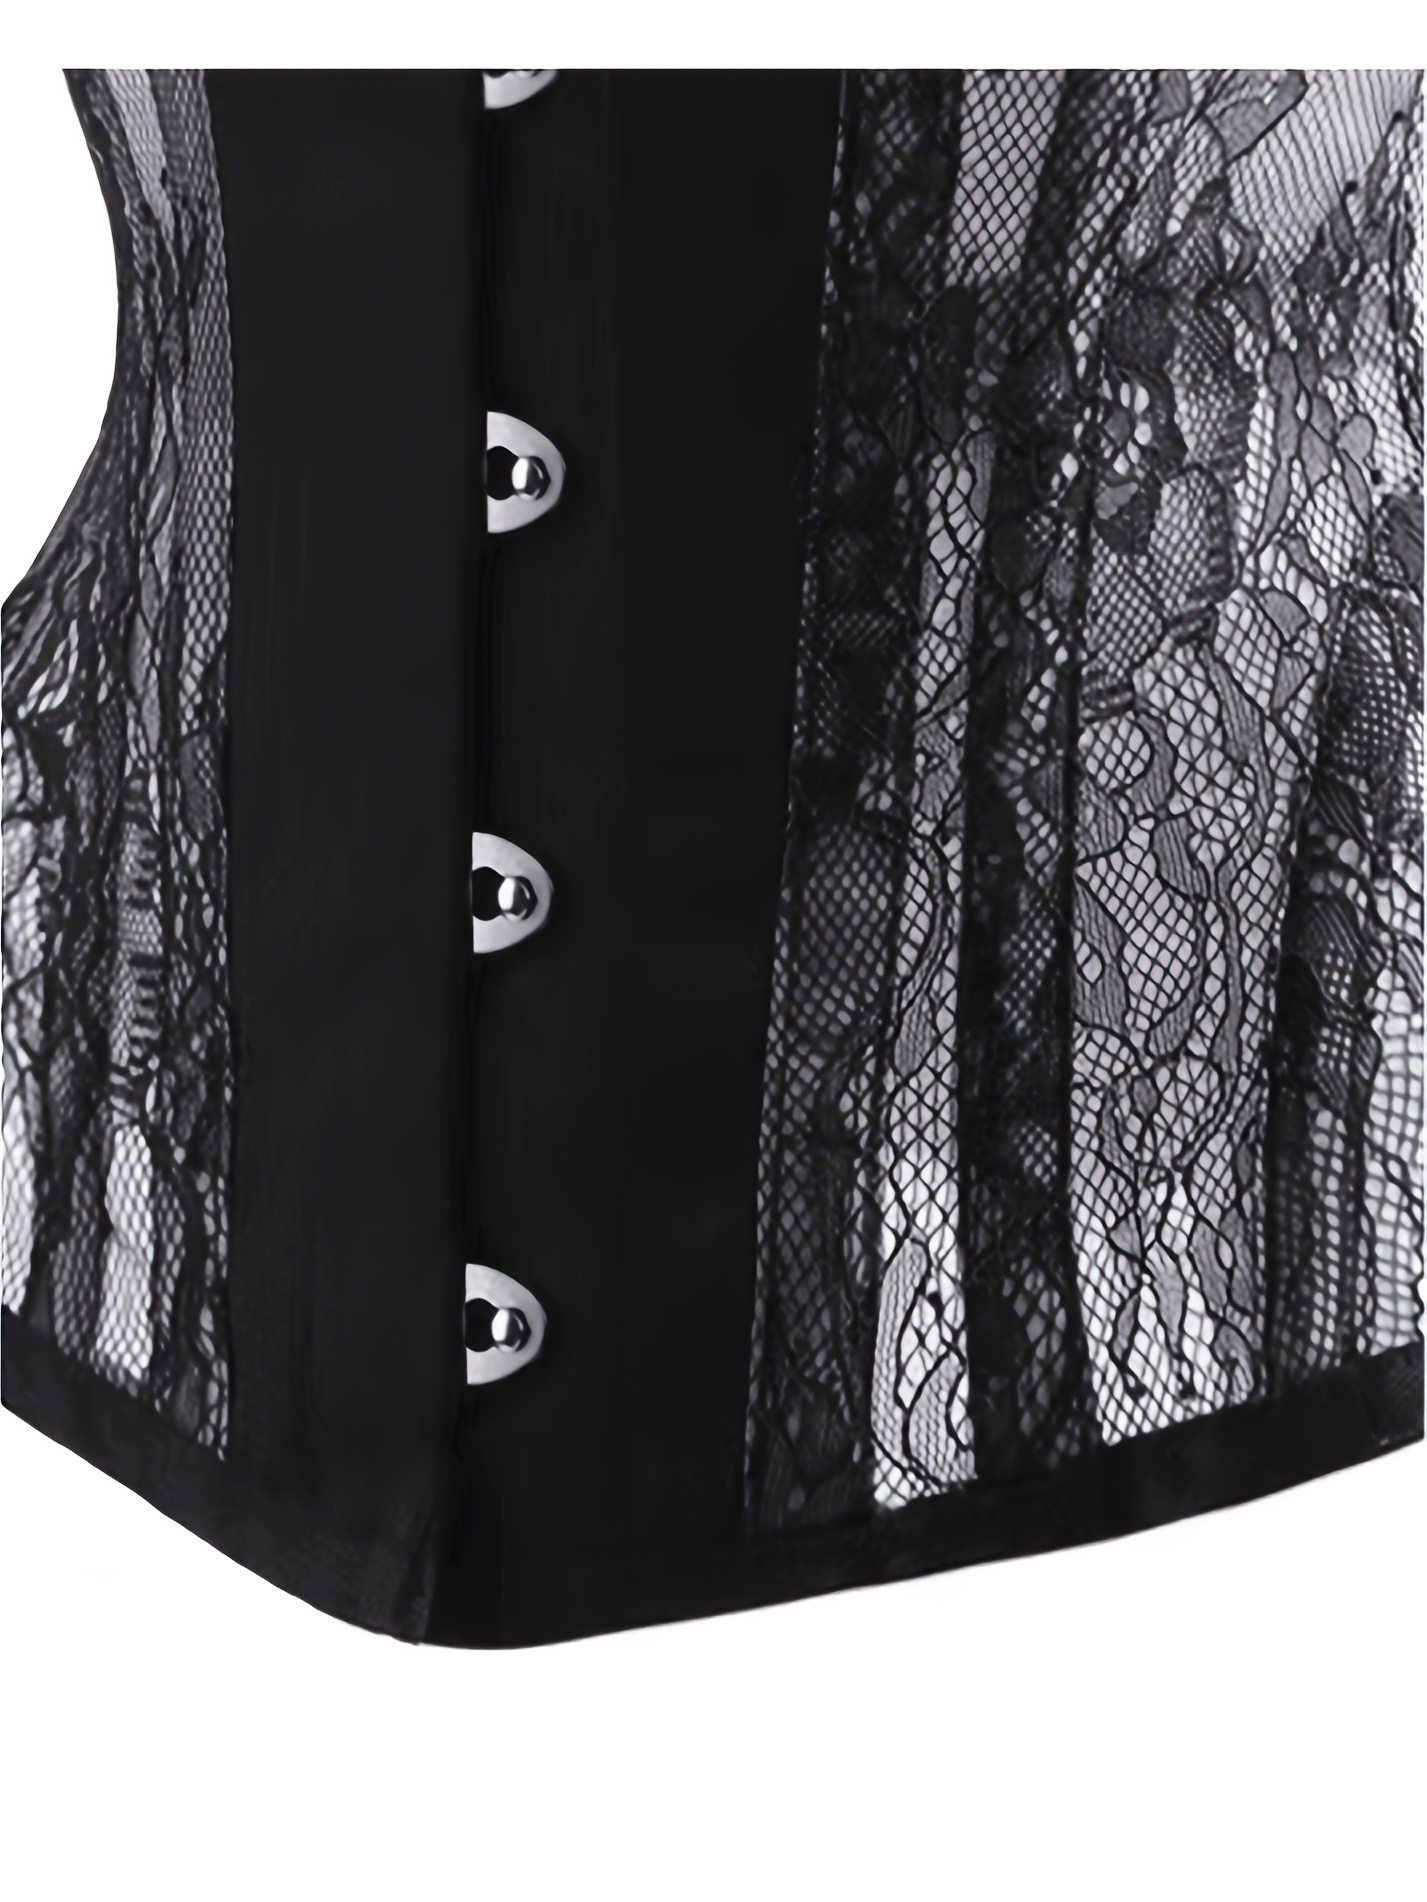 Sexy Women's Clothing Corset Red & Black Brocade Authentic Steel Boned  Tight Lacing Waist Trainer Overbust Corset Top Bustier